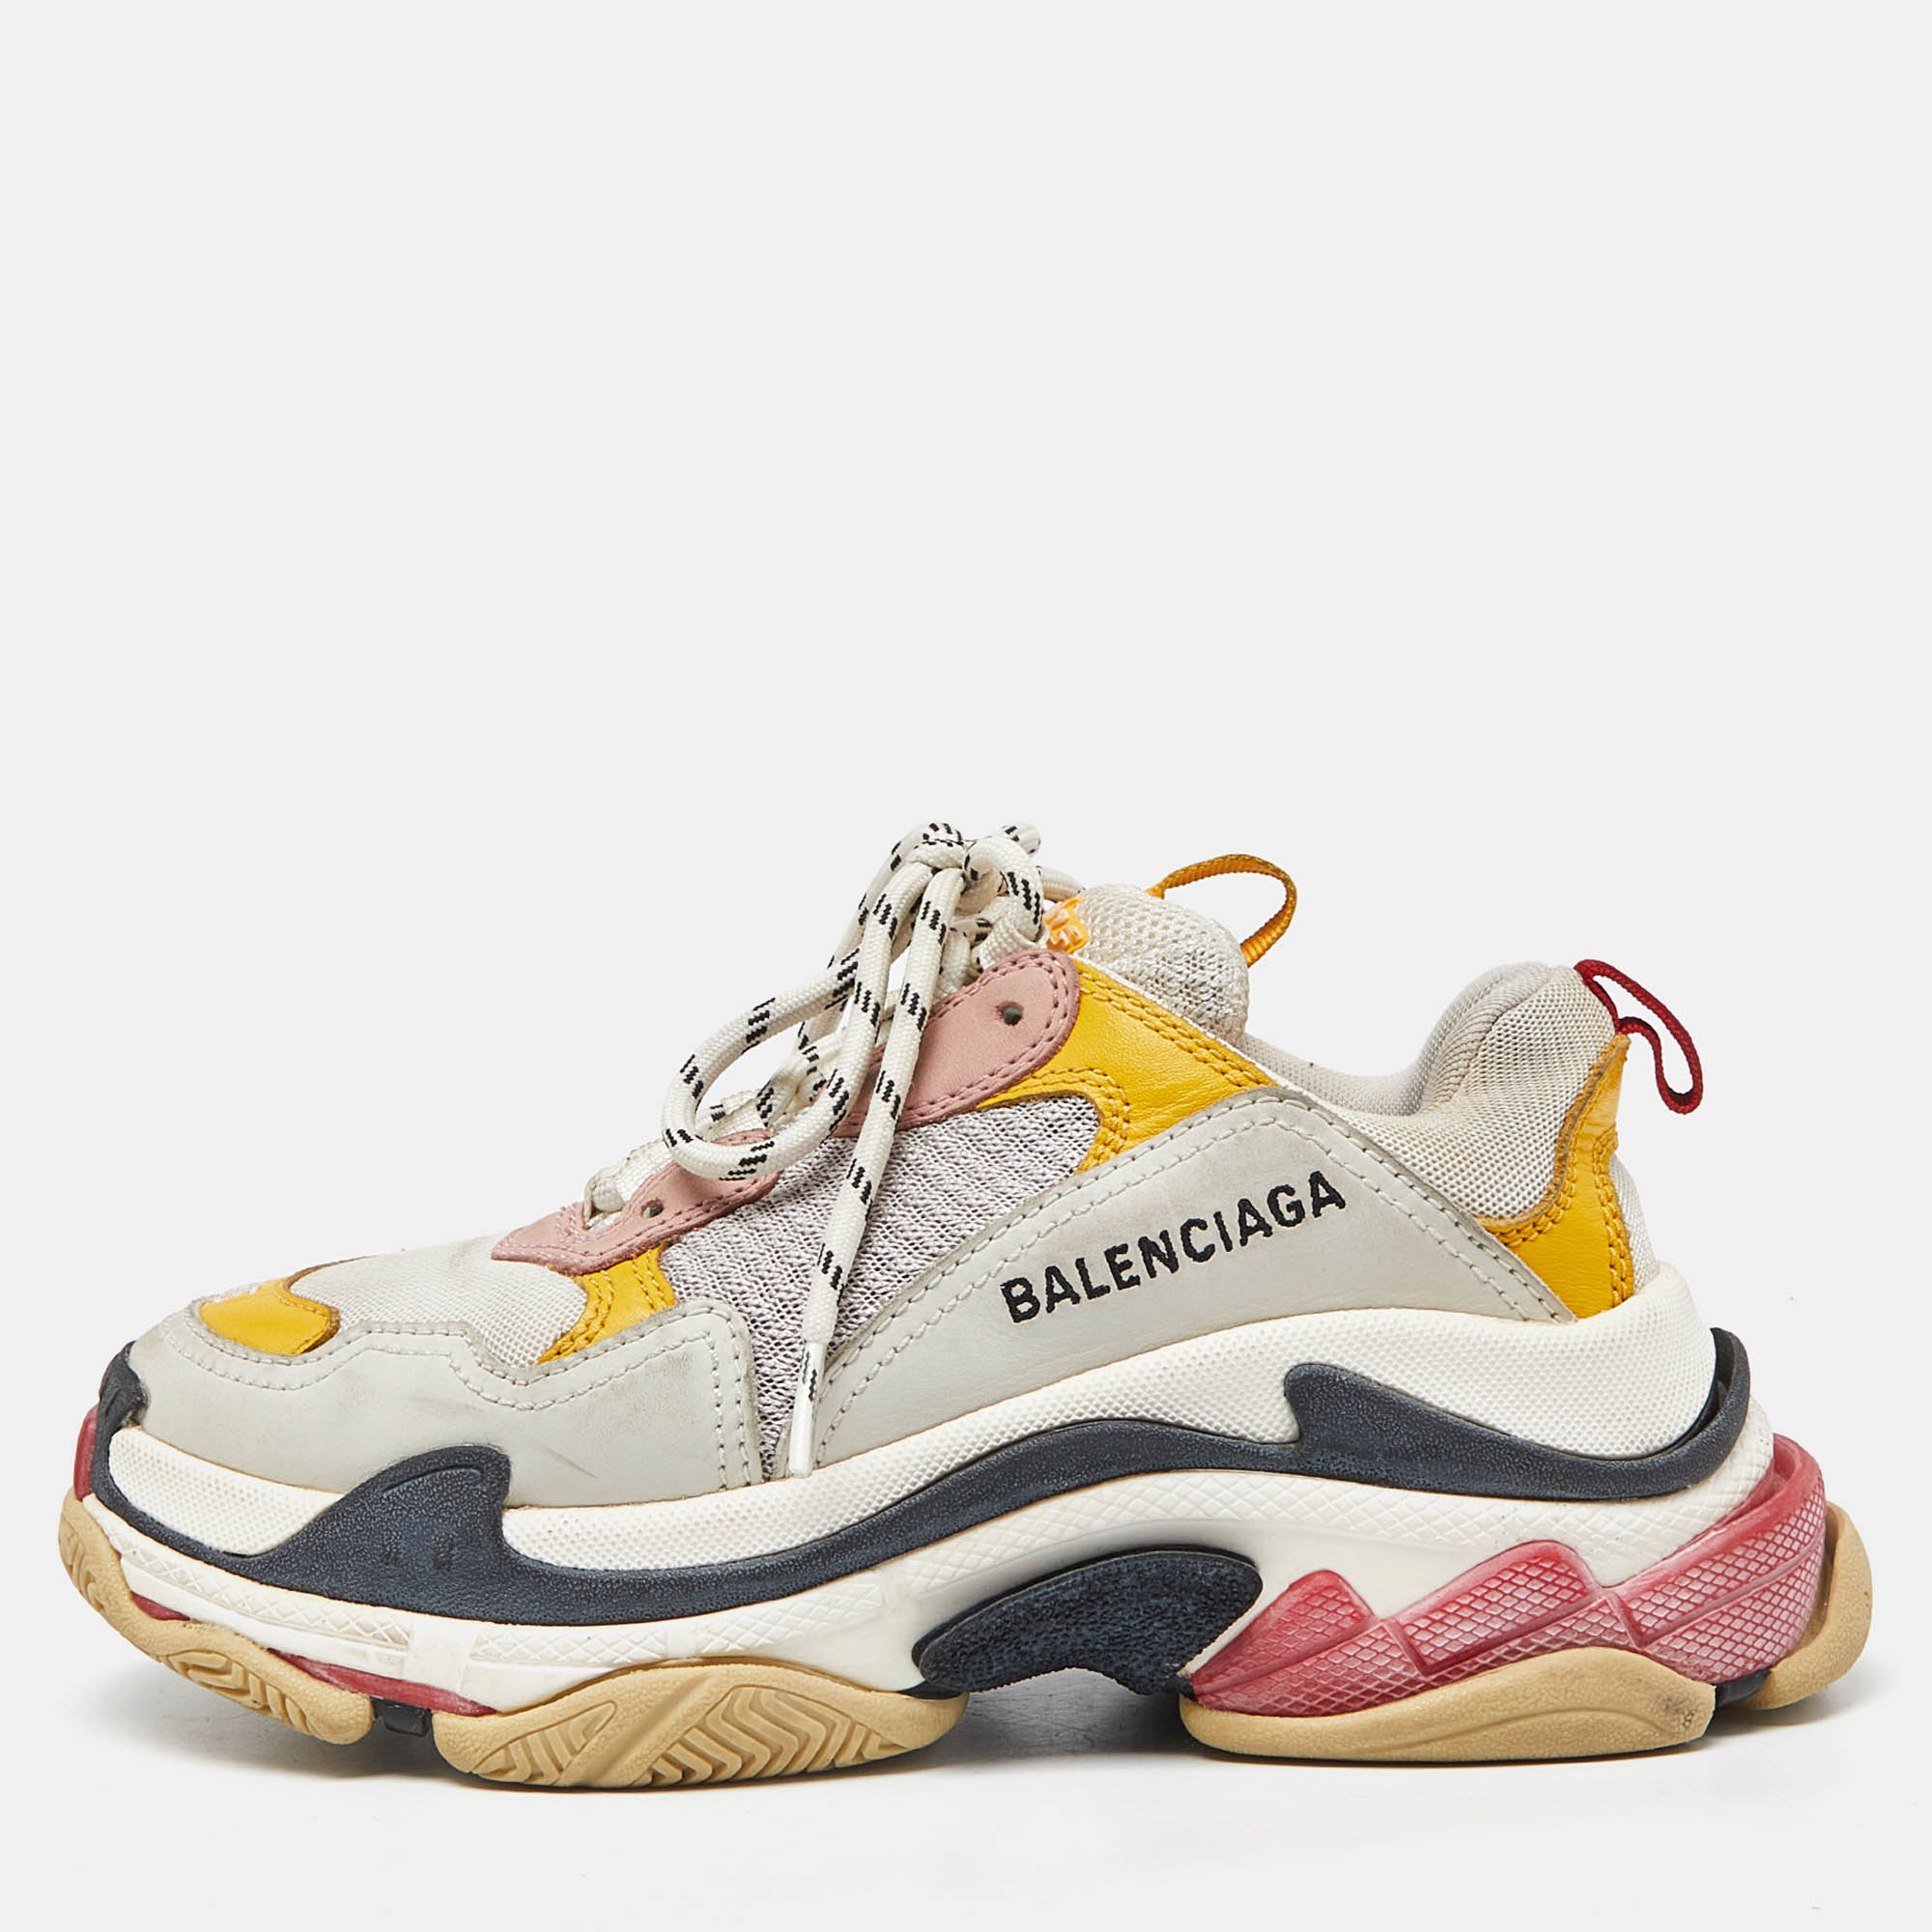 Balenciaga multicolor leather and mesh triple s low top sneakers size 35